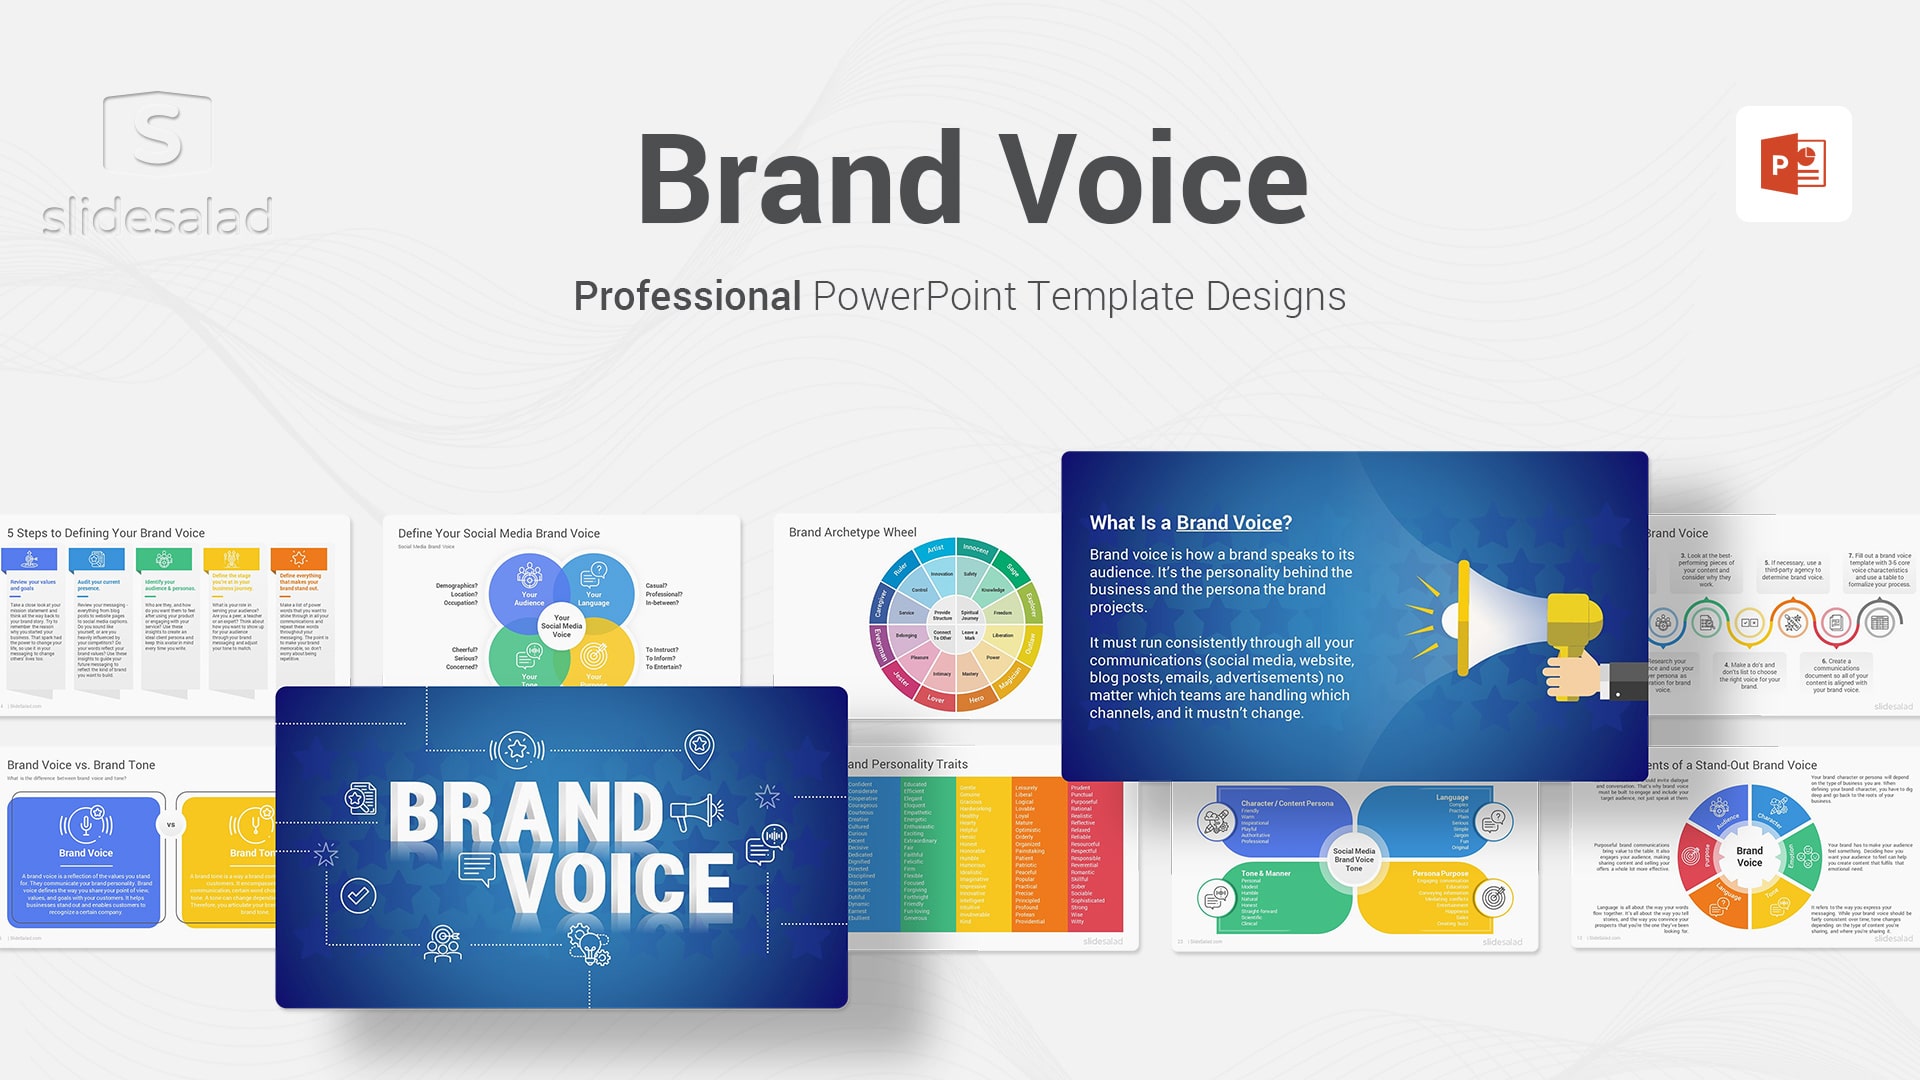 Brand Voice PowerPoint Template Designs - Personality and Emotion Infused Brand Voice PPT Theme Layouts